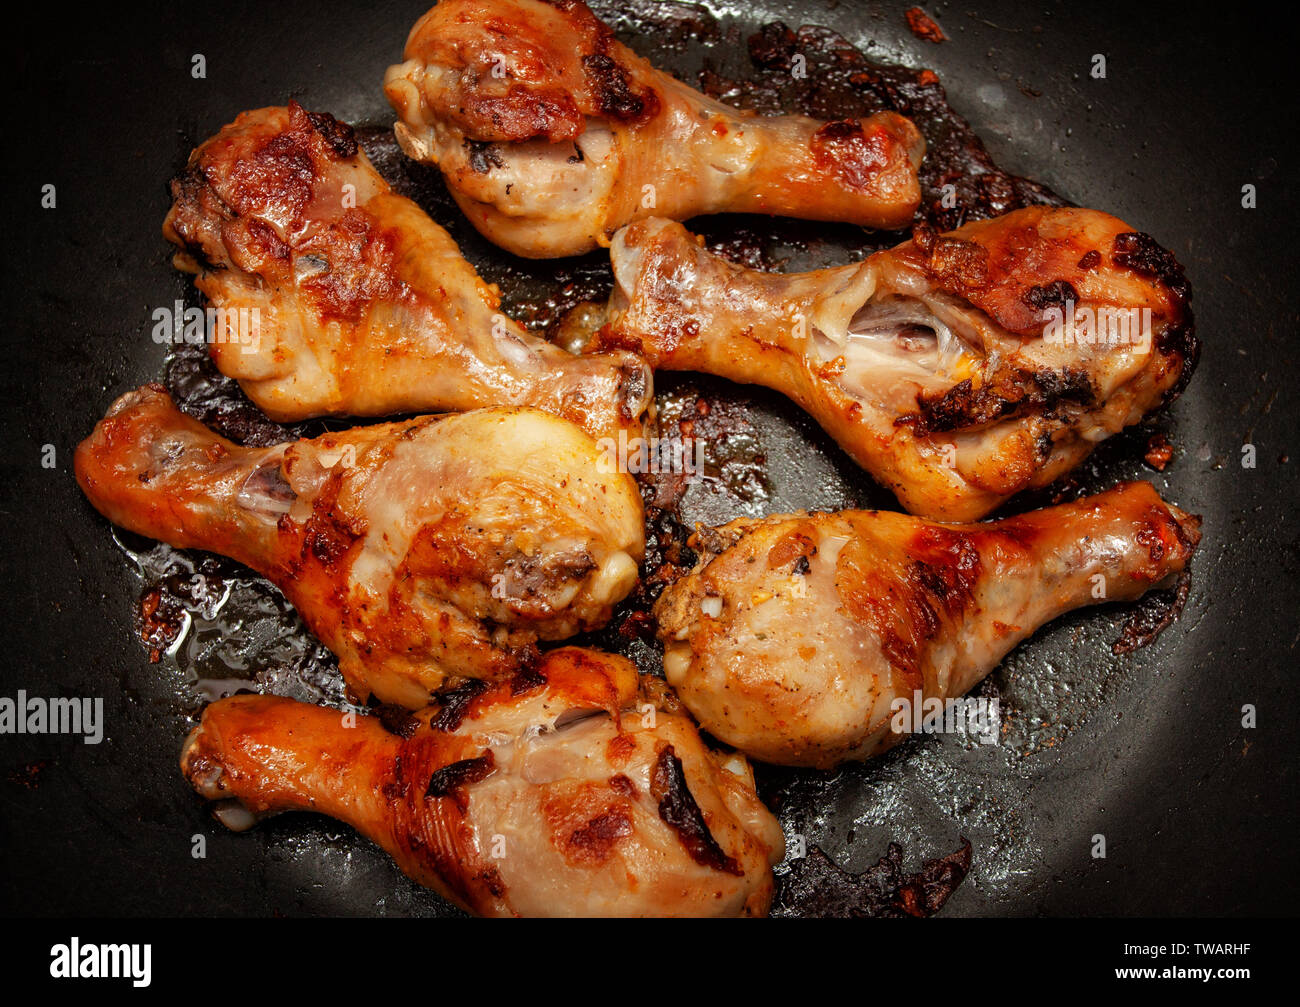 Roasted chicken legs in a pan Stock Photo